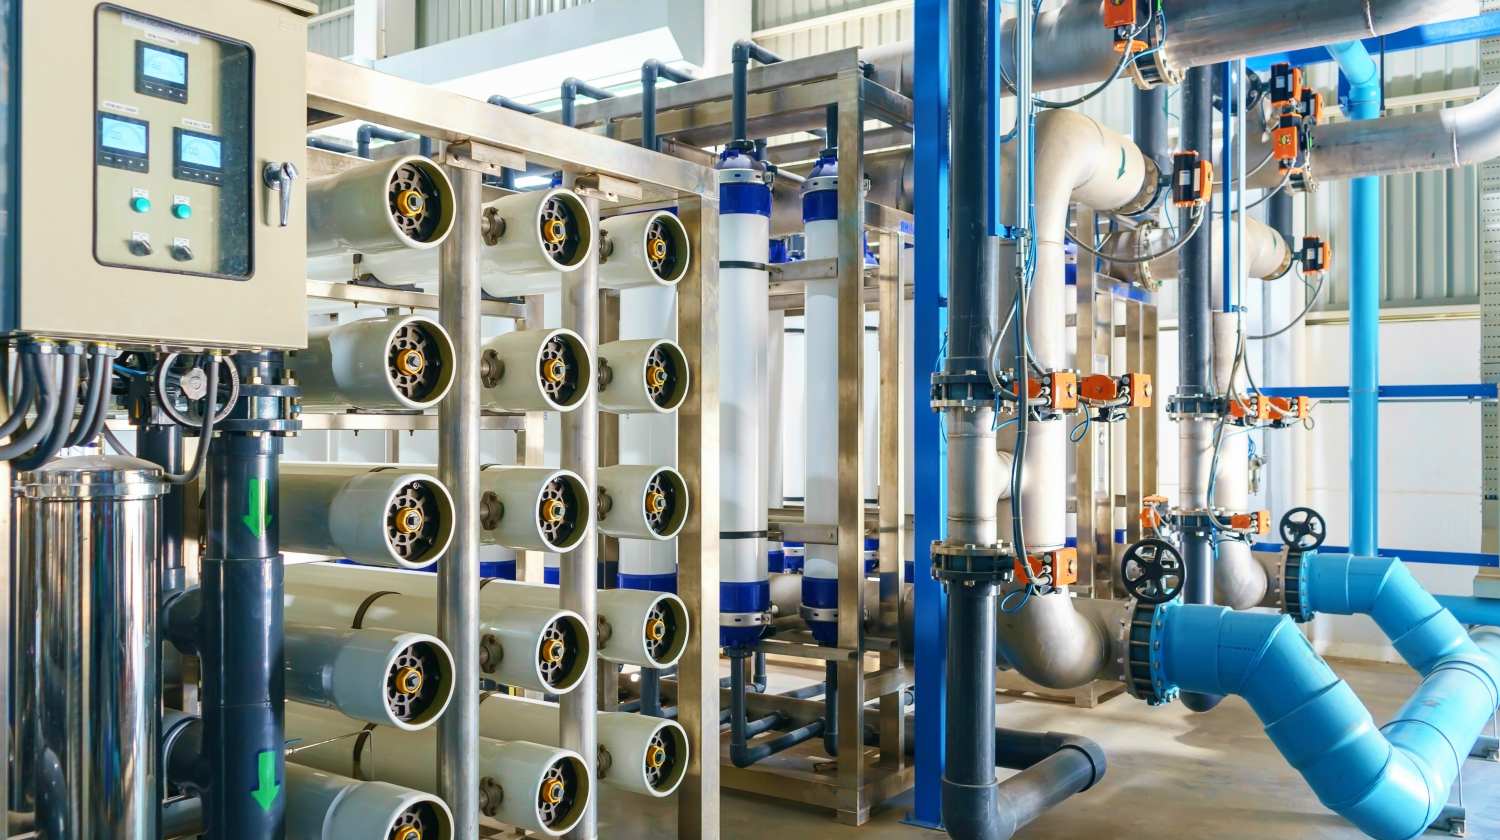 Feature | reverse osmosis system water drinking plant | Best Bottled Water That’s Safe To Drink [Reverse Osmosis Water] | bottled water brands